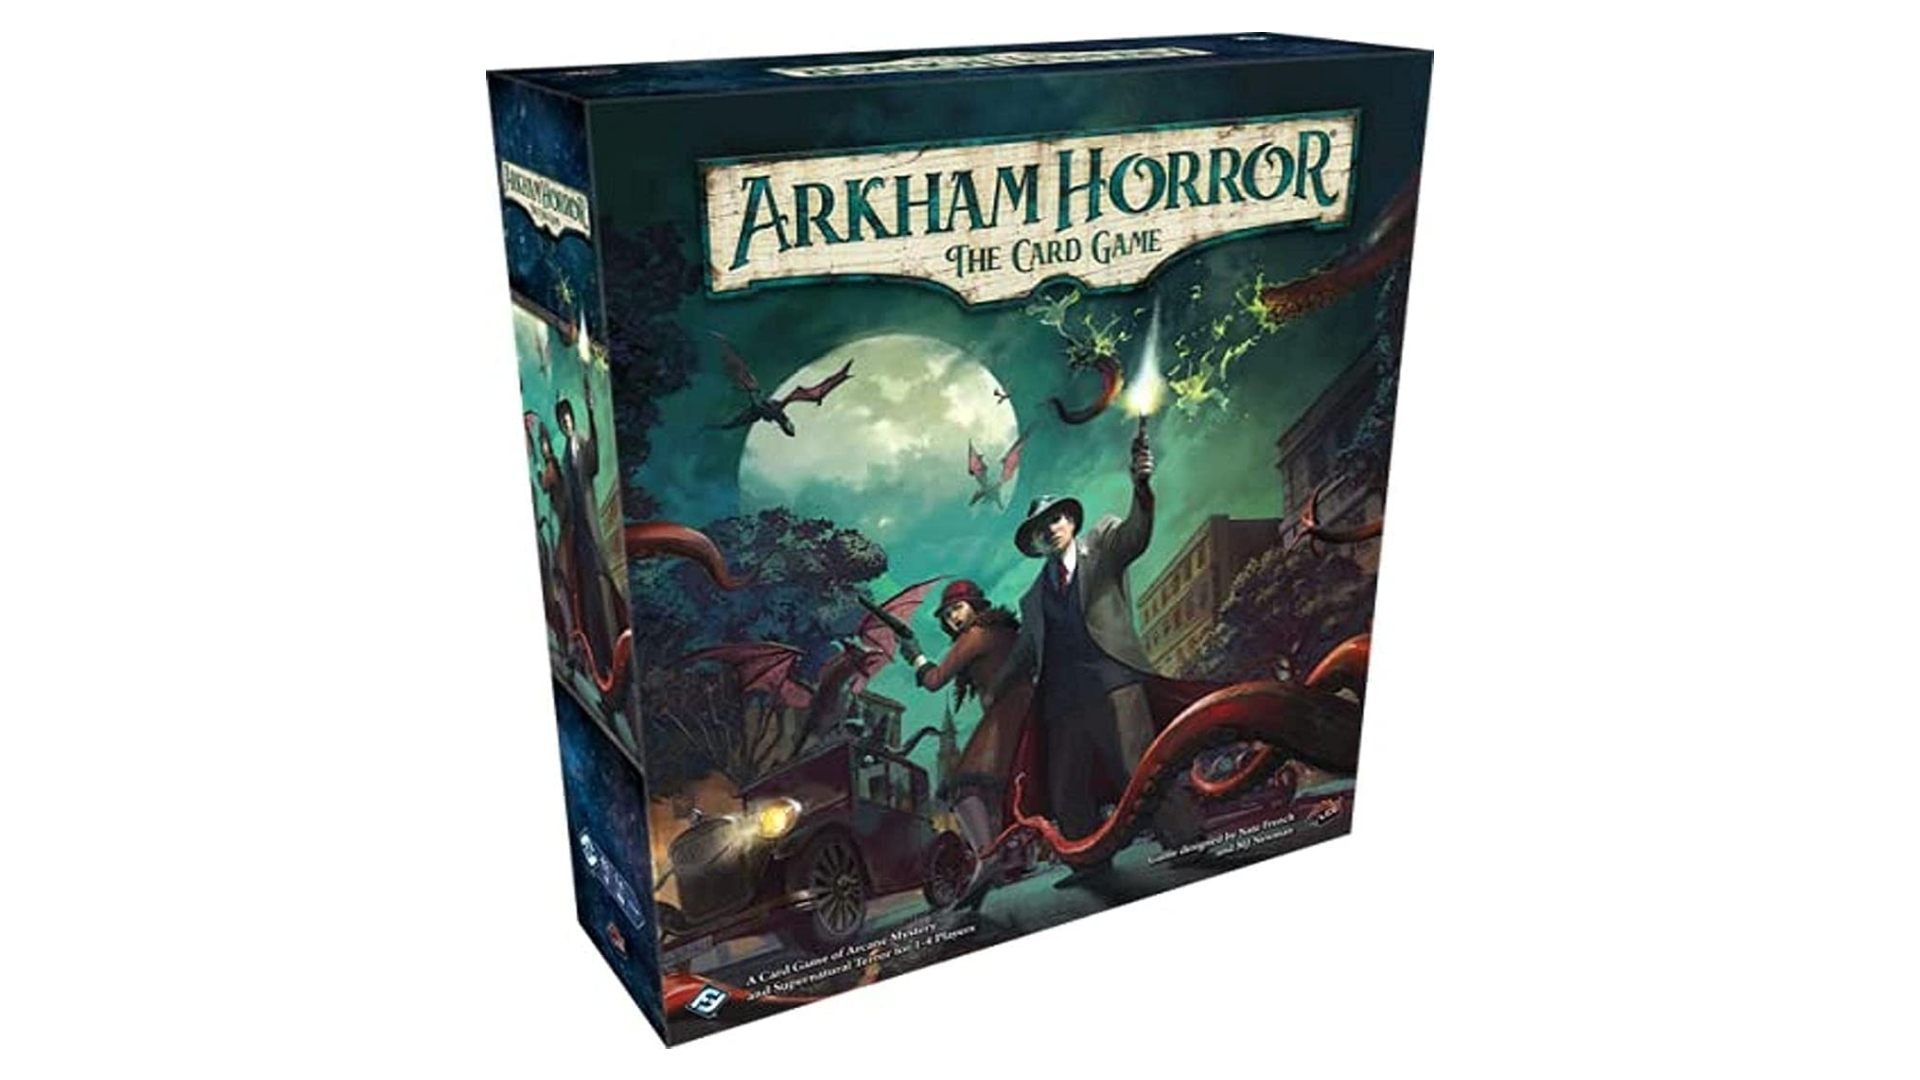 Two player card game, Arkham Horror, boxed on a white background. It's box art shows 1920s style detectives.